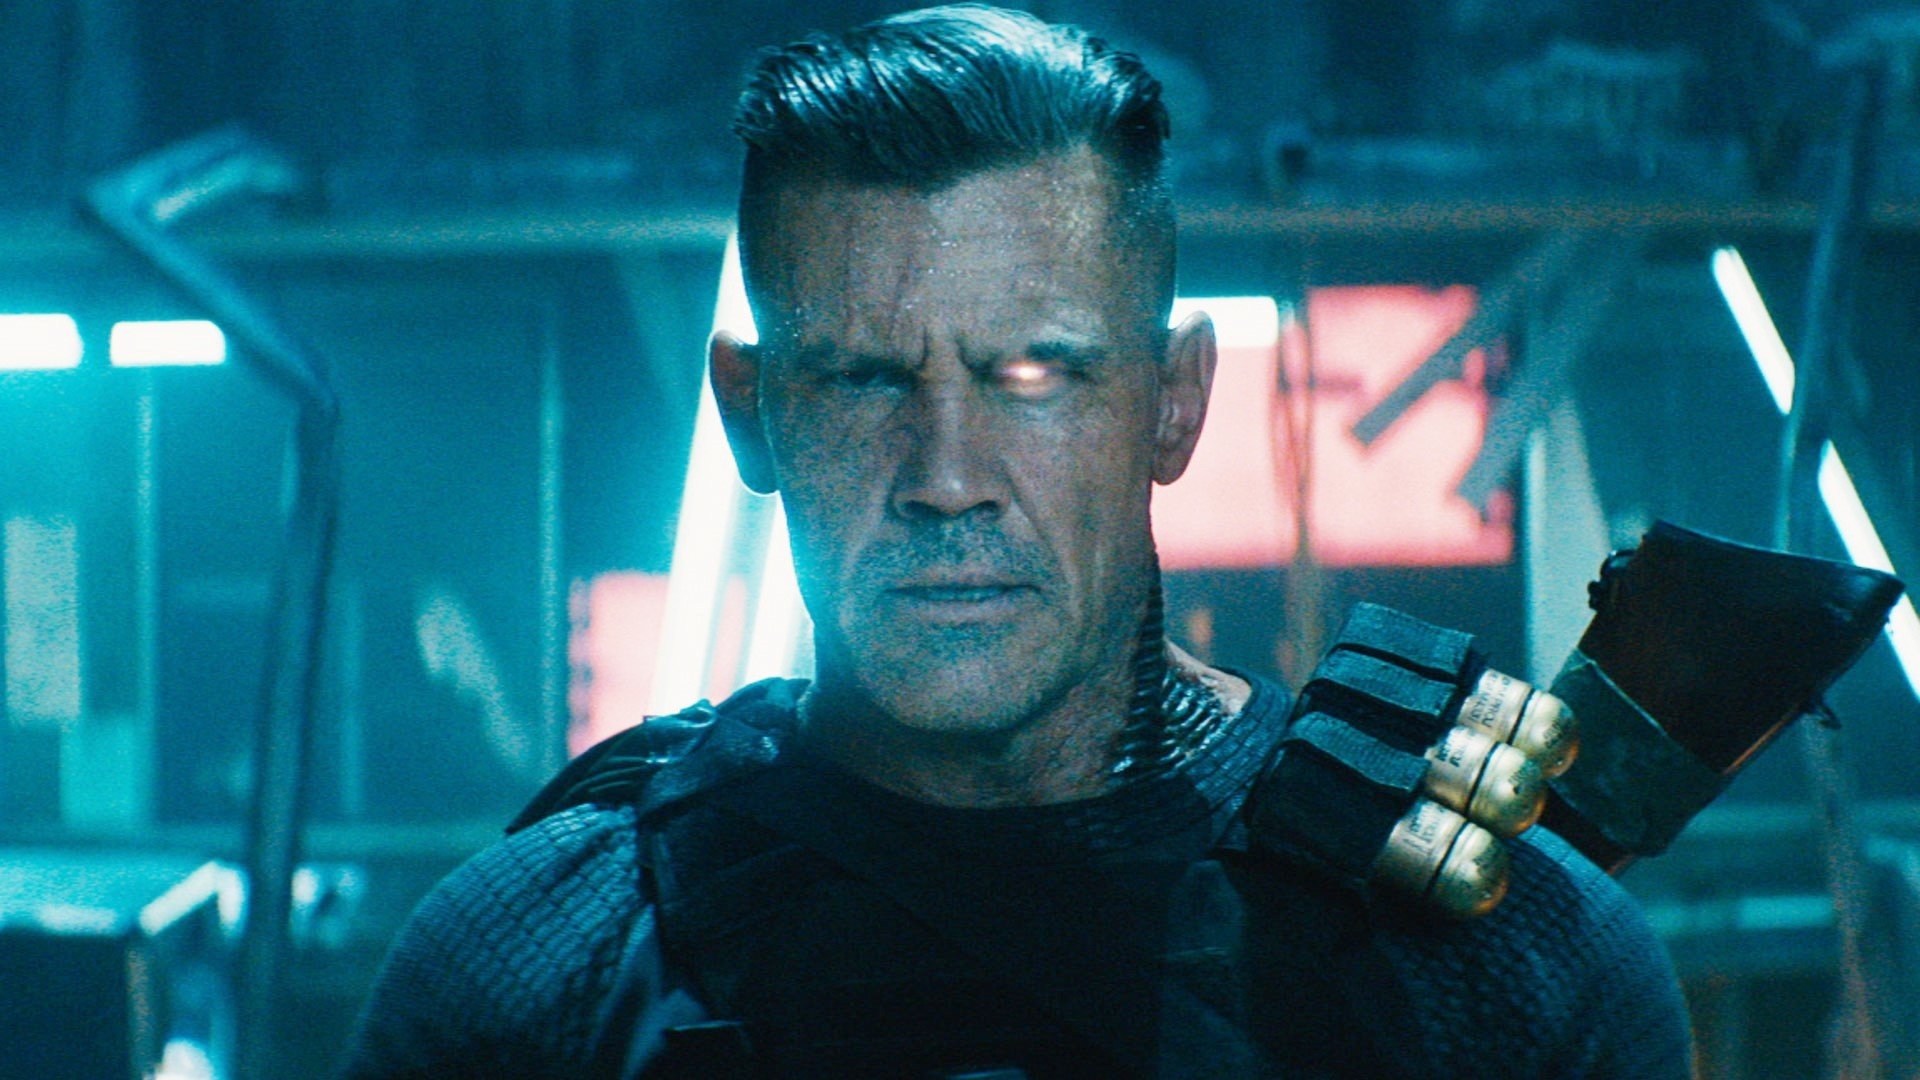 Josh Brolin stars as Nathan Summers/Cable in 20th Century Fox's Deadpool 2 (2018)